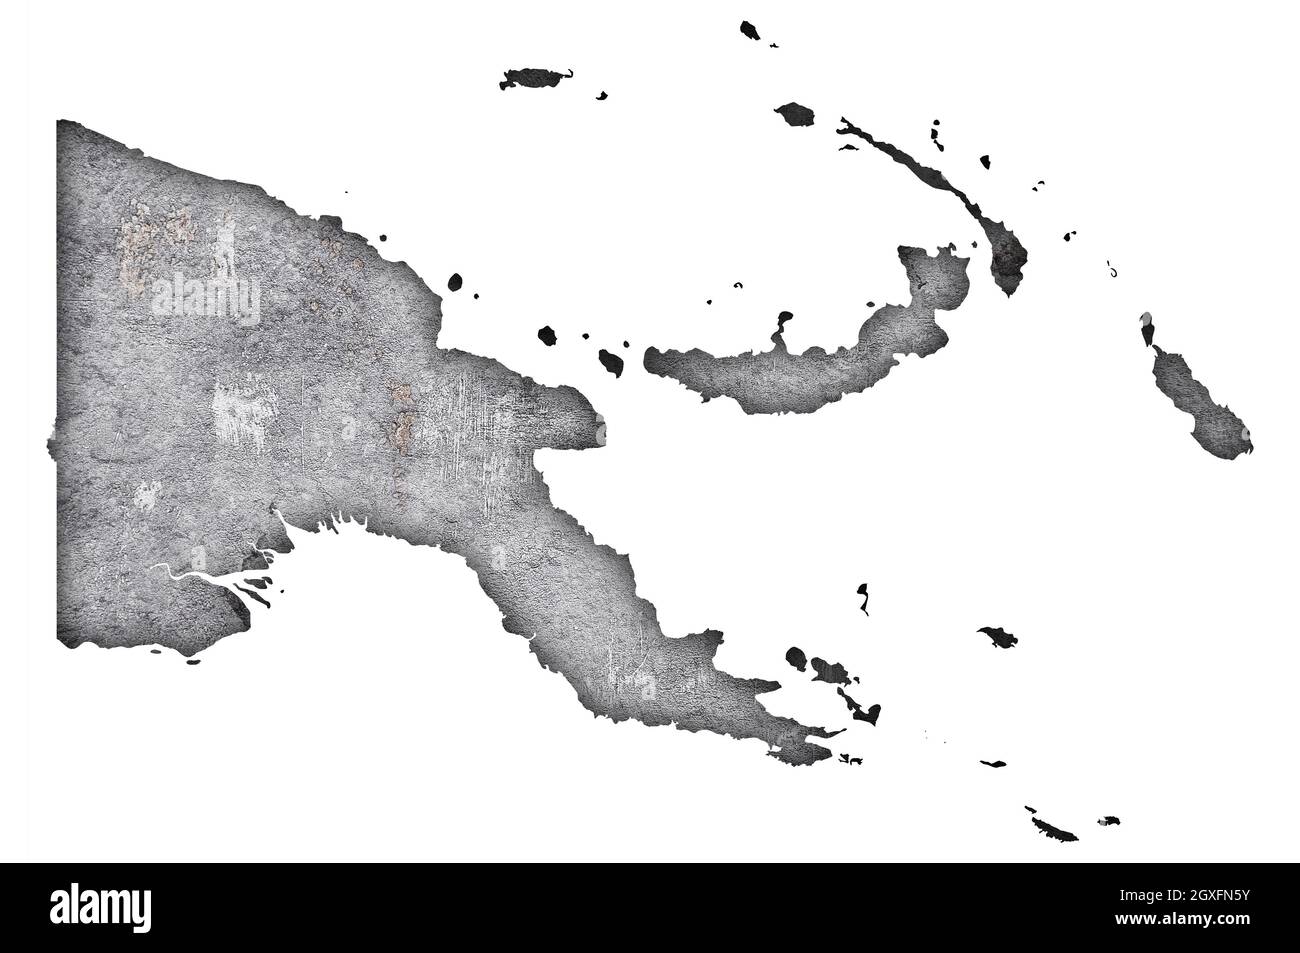 Map of Papua New Guinea on weathered concrete Stock Photo